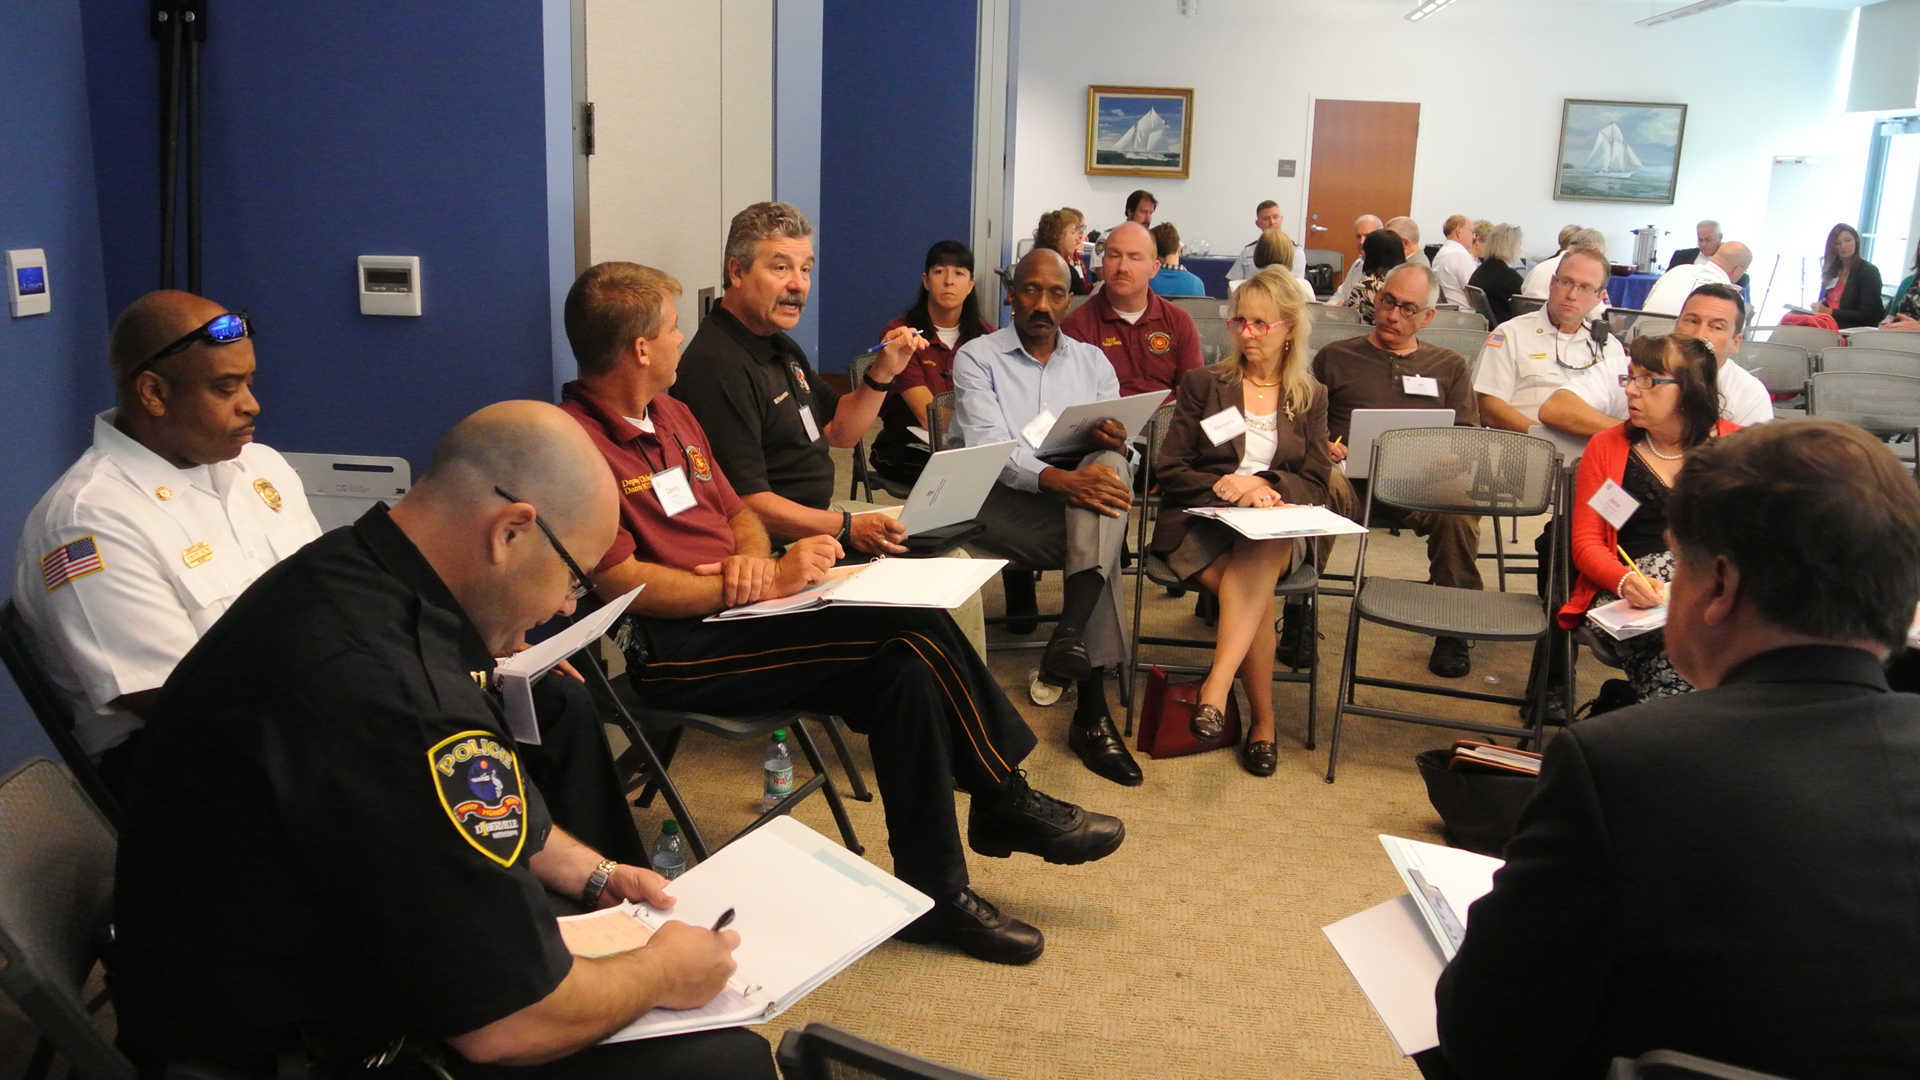 A “County Caucus” session at the Mississippi Gulf Coast Alliance for Response Forum at the Maritime & Seafood Industry Museum in Biloxi on April 27, 2016. Representatives from collecting institutions met with their county first responders and emergency managers. Image courtesy of FAIC.